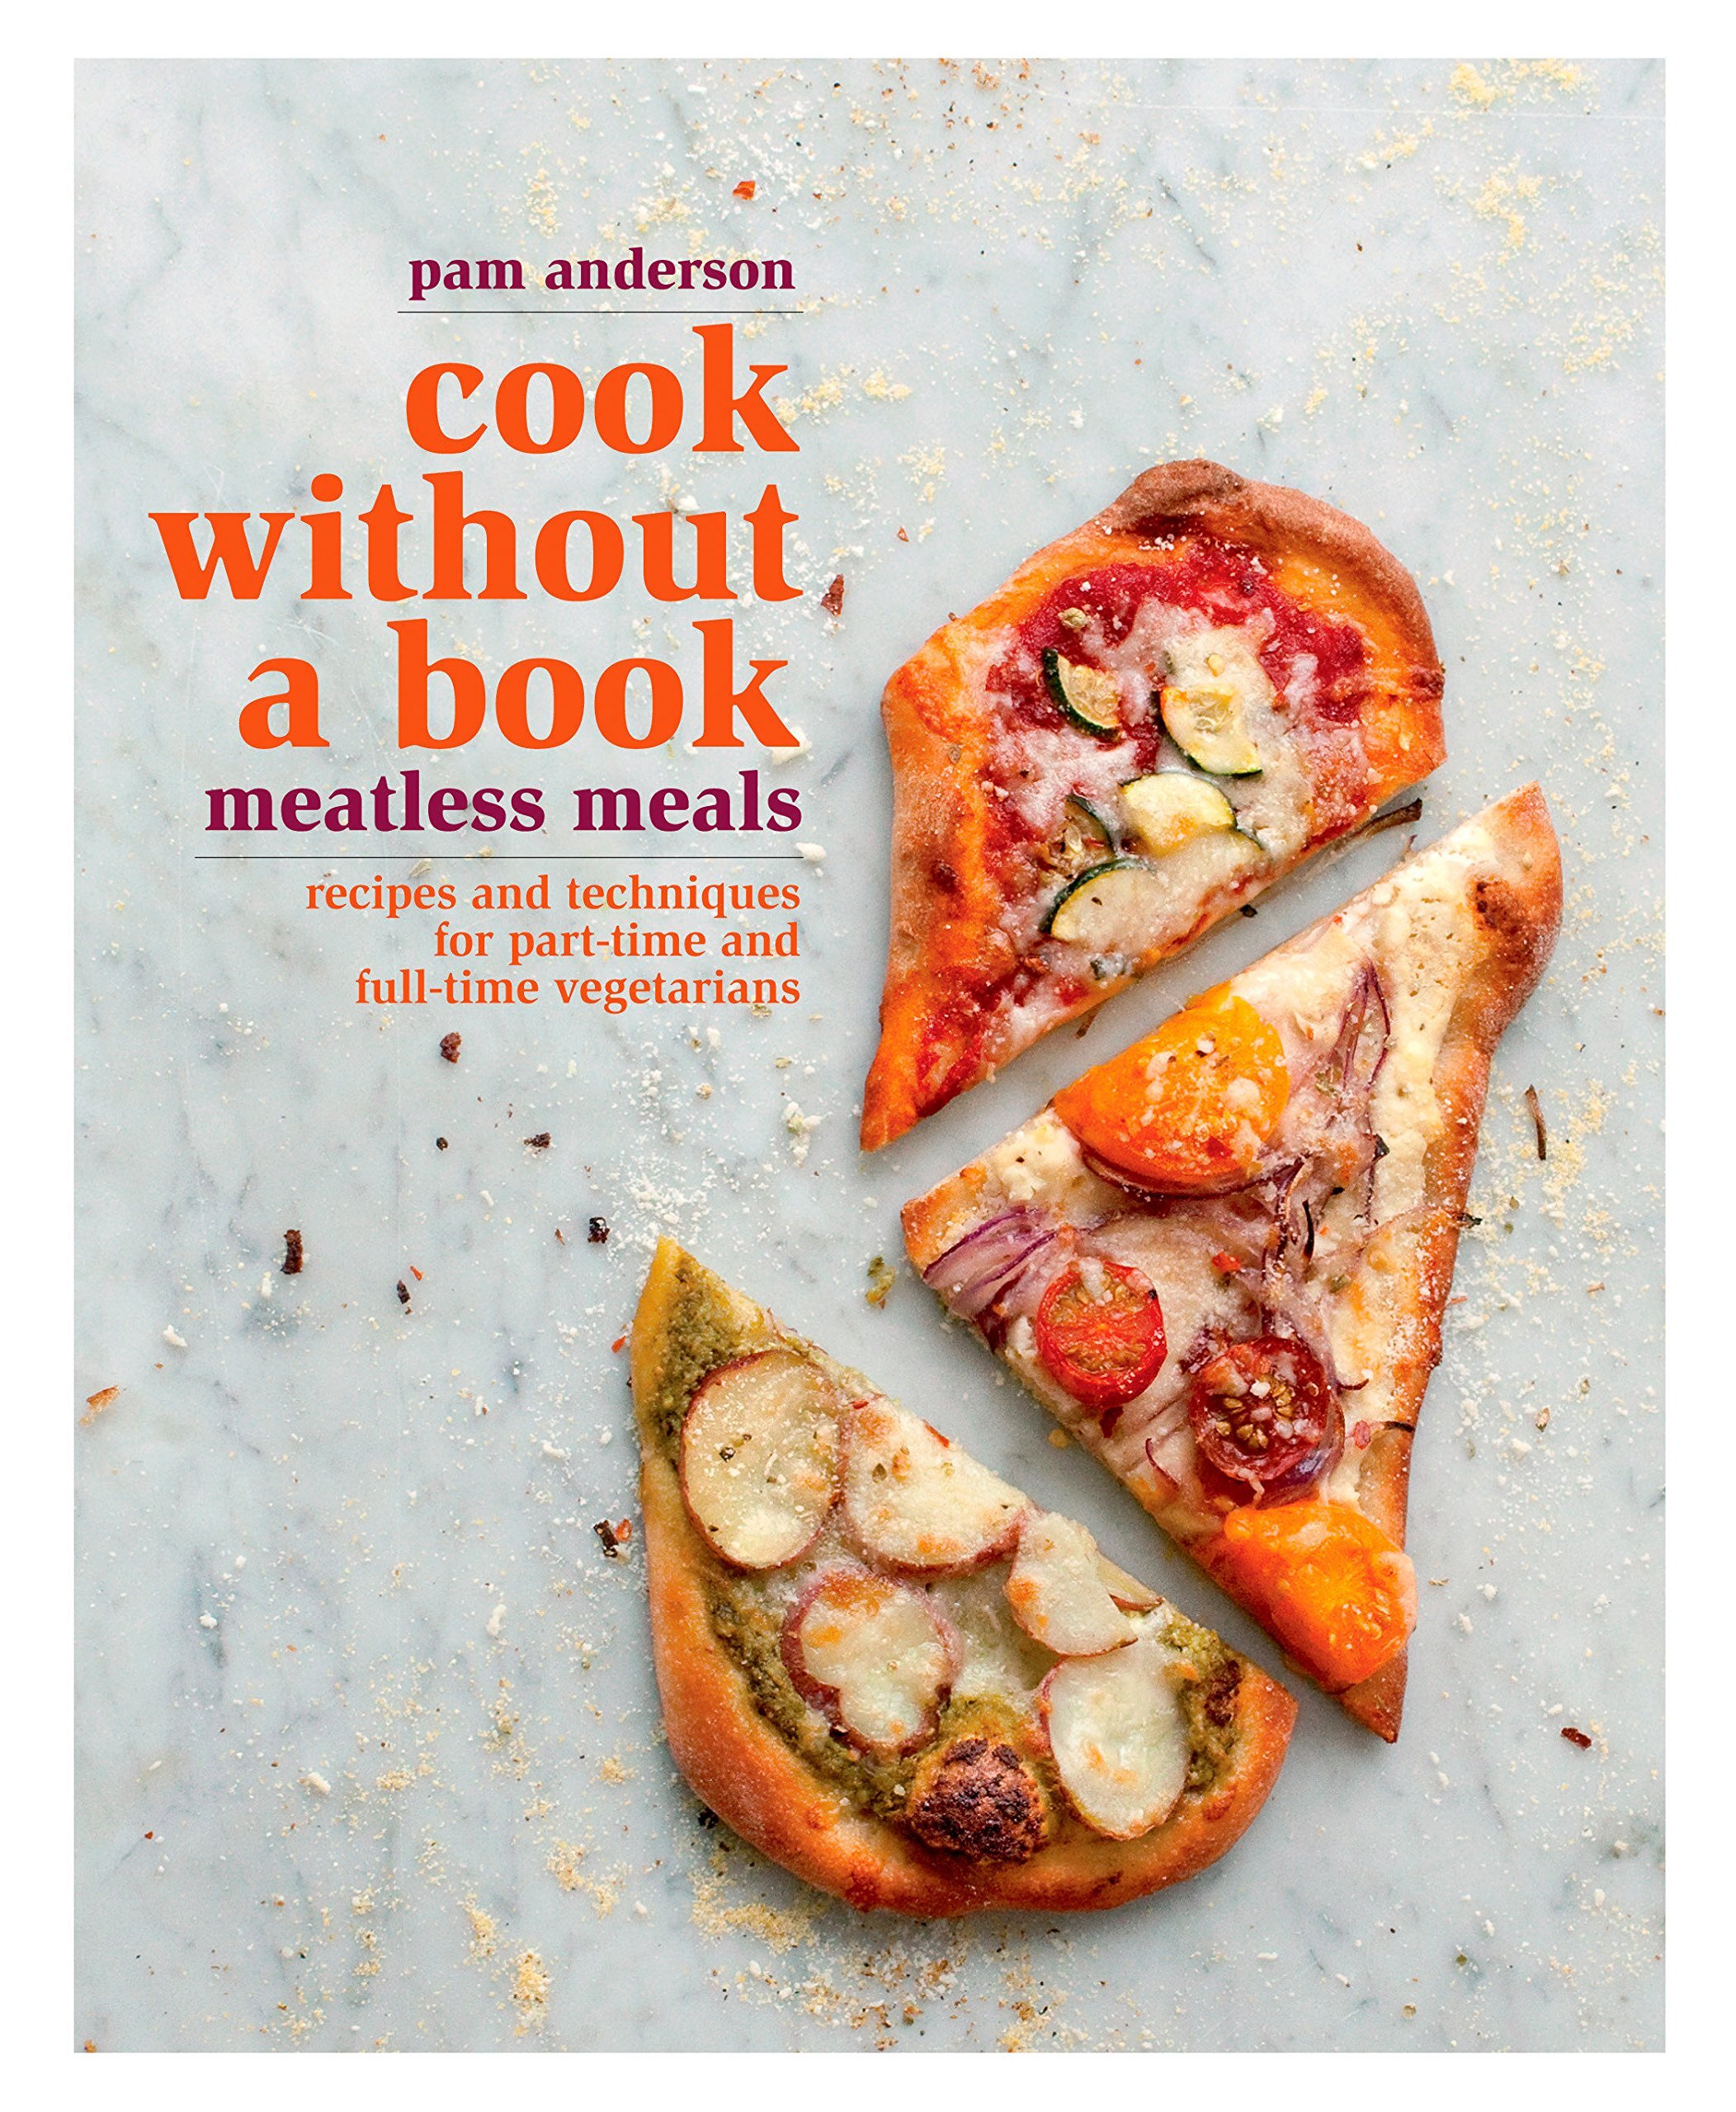 cook-without-a-book-meatless-meals.jpg